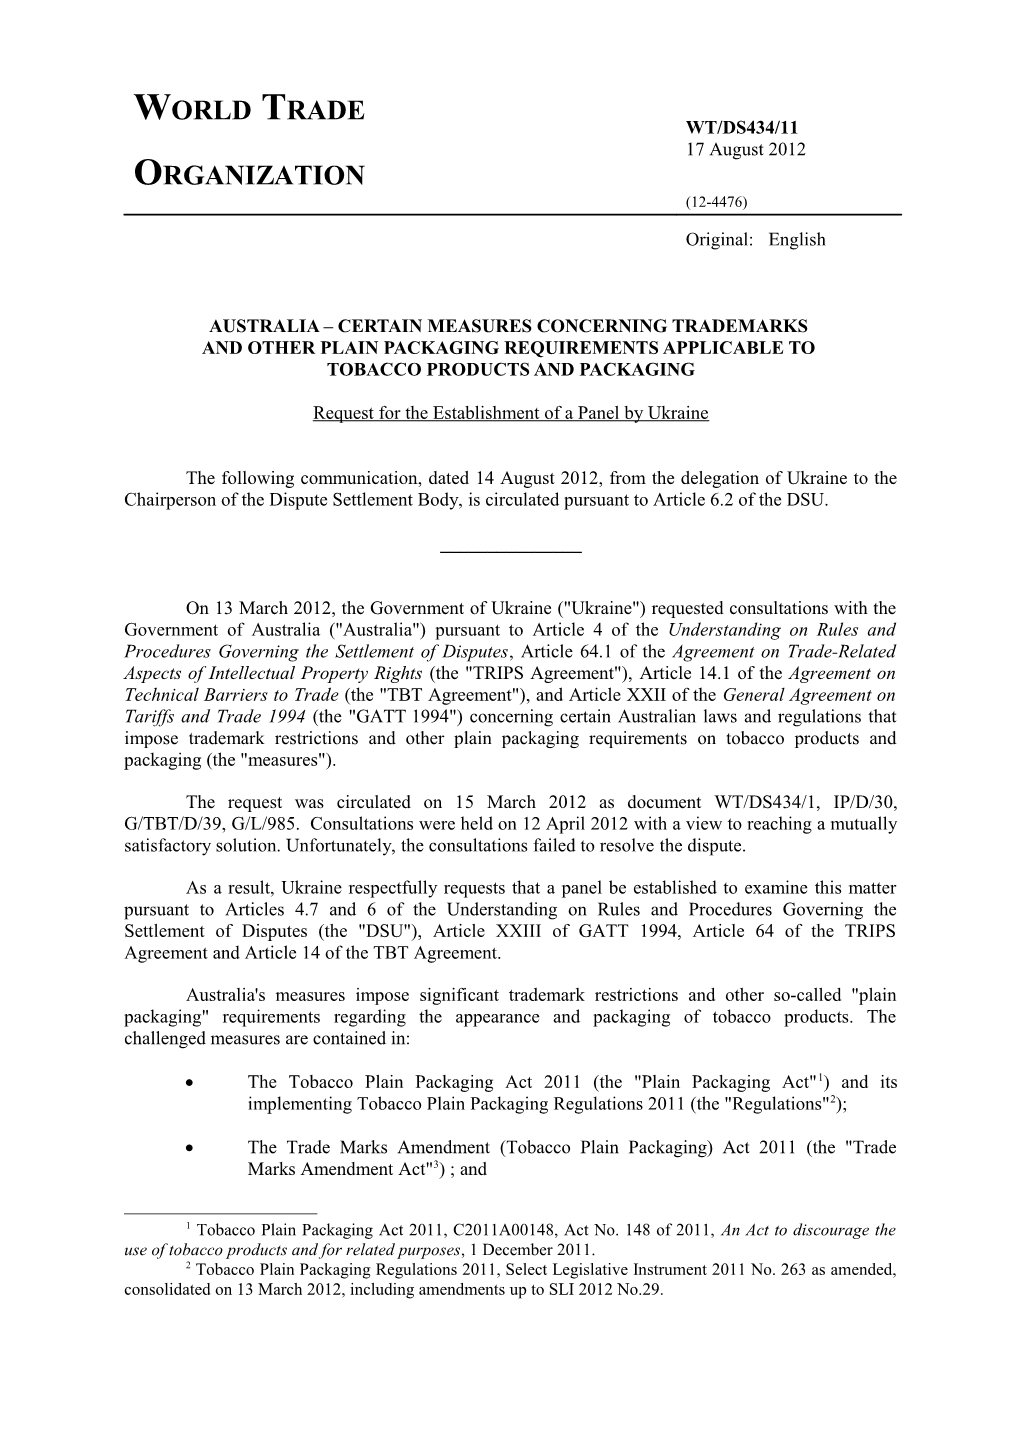 Request for the Establishment of a Panel by Ukraine